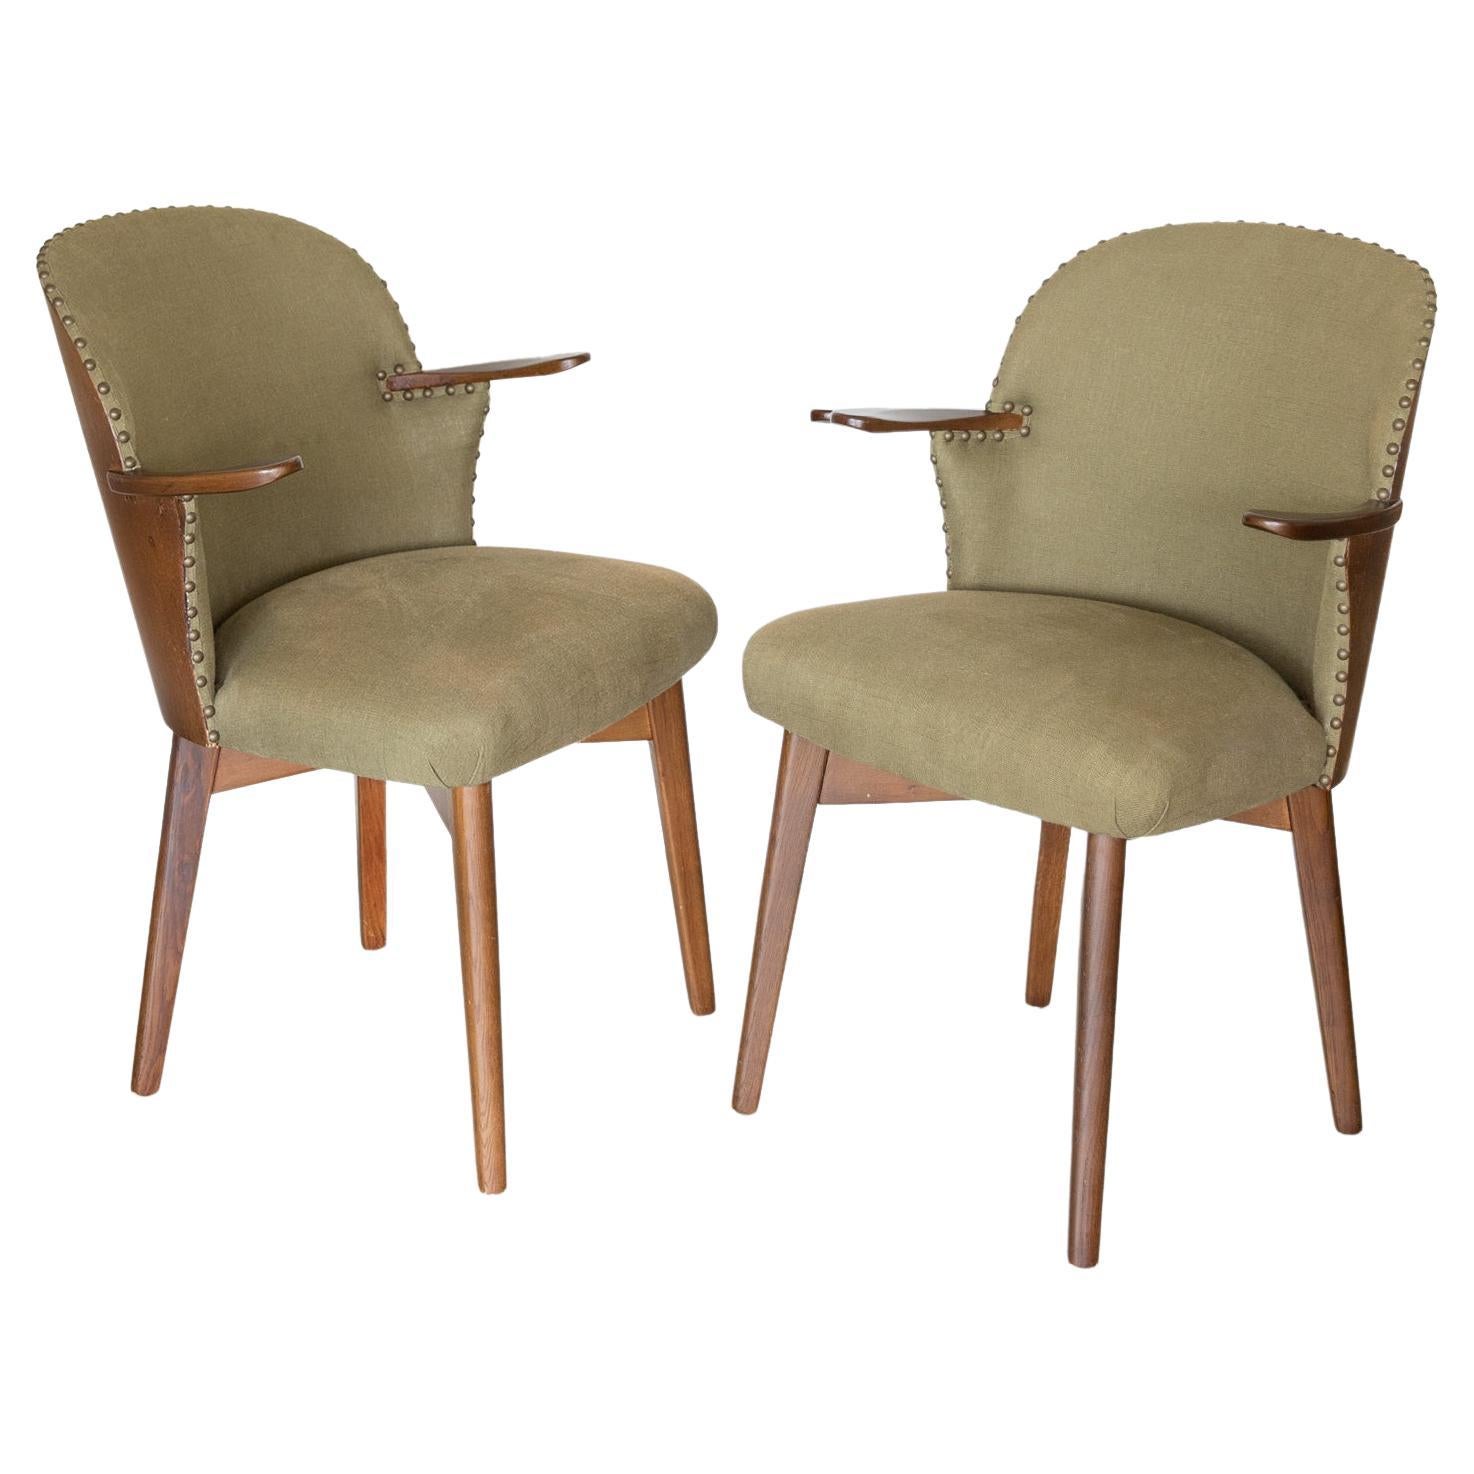 1960's Linen and Wood Chair For Sale